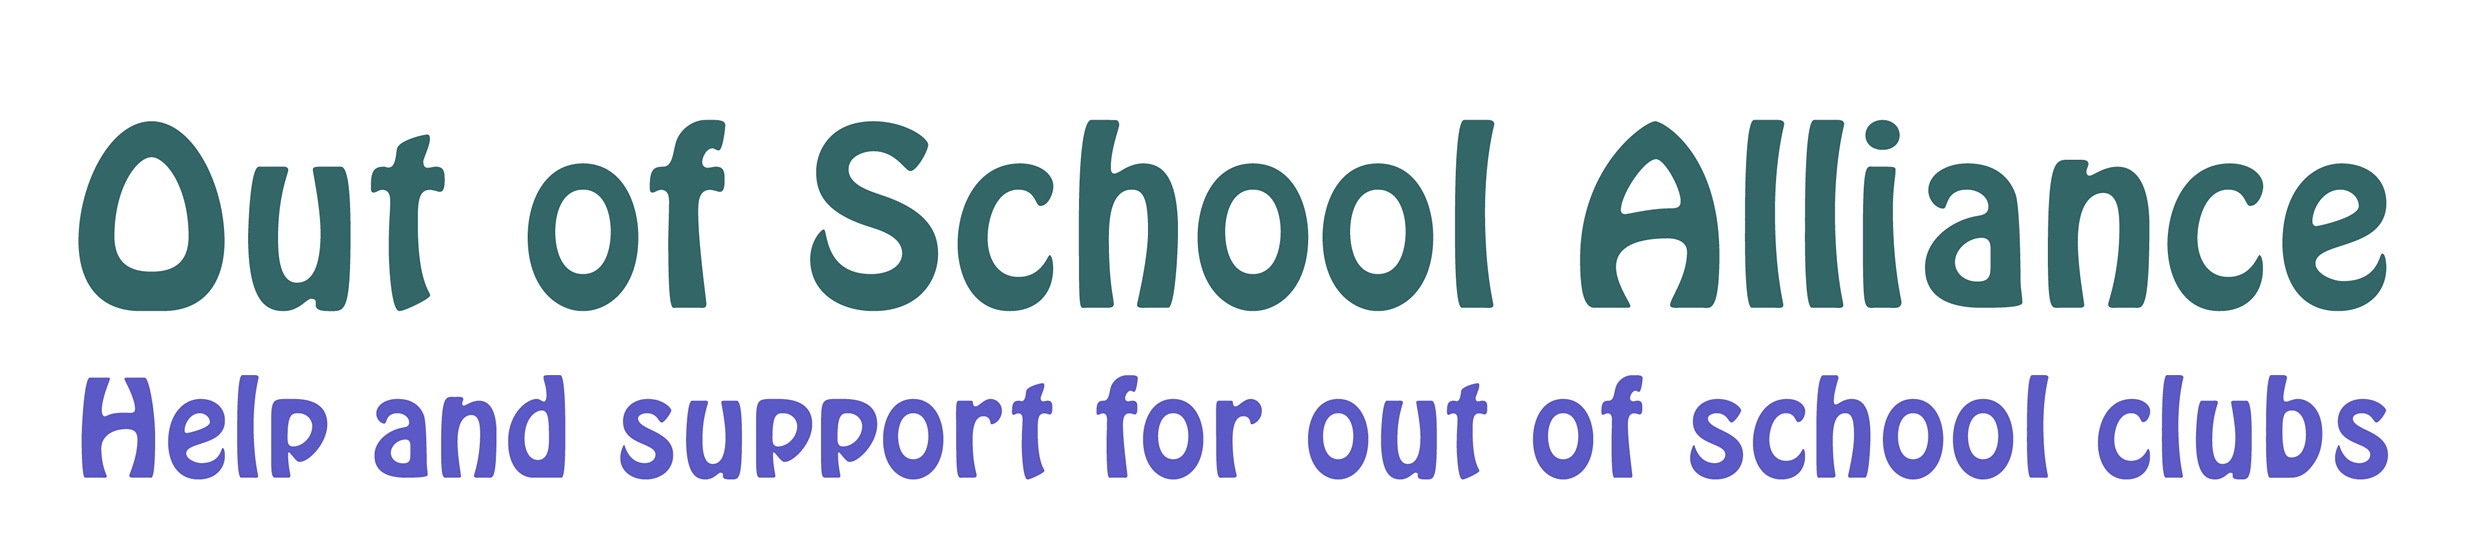 Out of School Alliance Logo